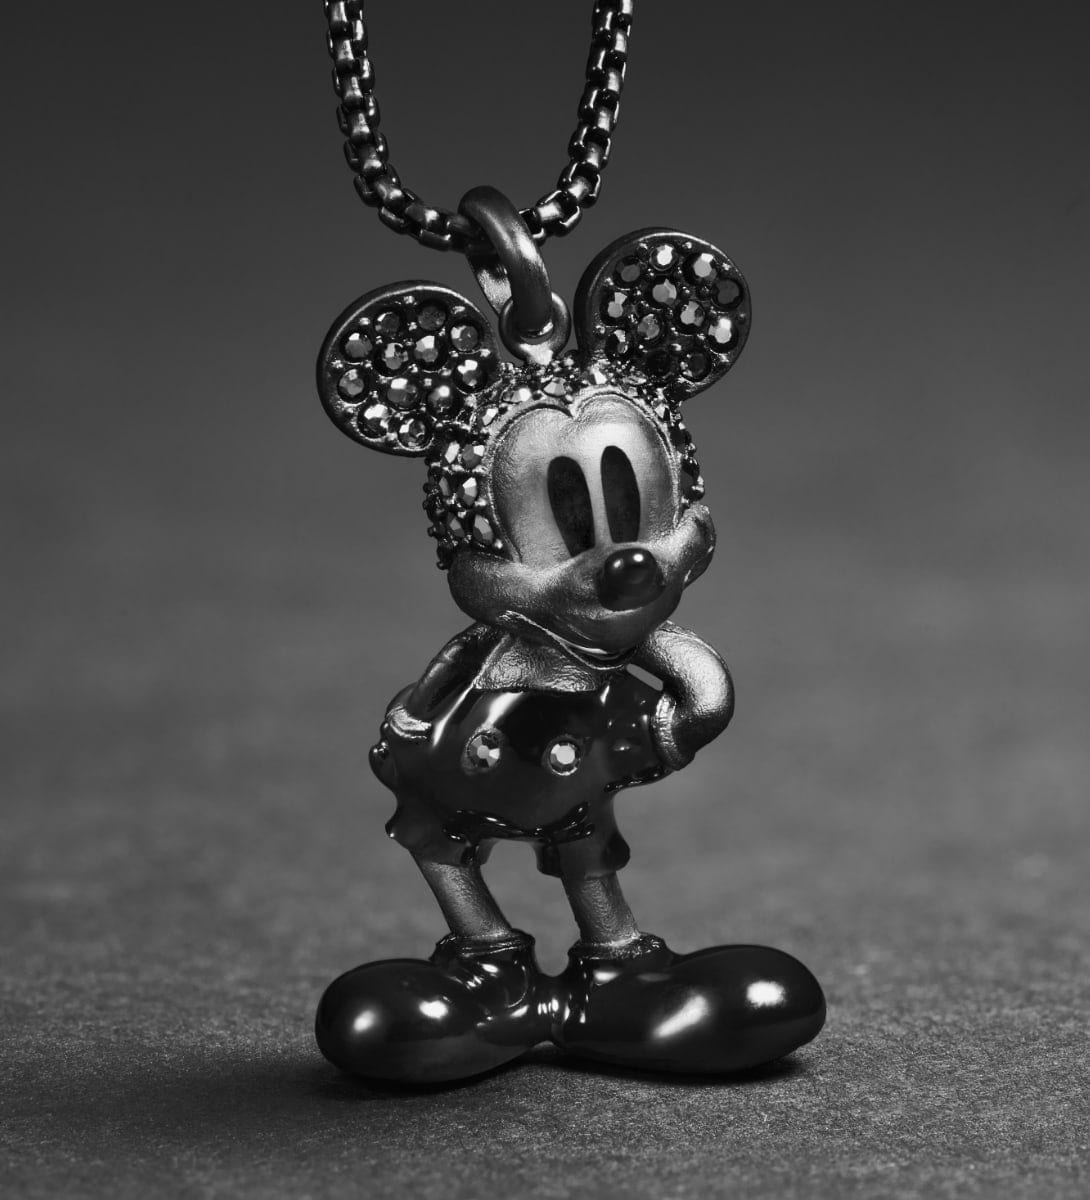 An animated GIF of two images. The first image features an all-black Mickey Mouse figurine pendant necklace studded with black hematite crystals. The second image showcases a gold-tone pendant of Minnie Mouse’s profile, accented with crystals.